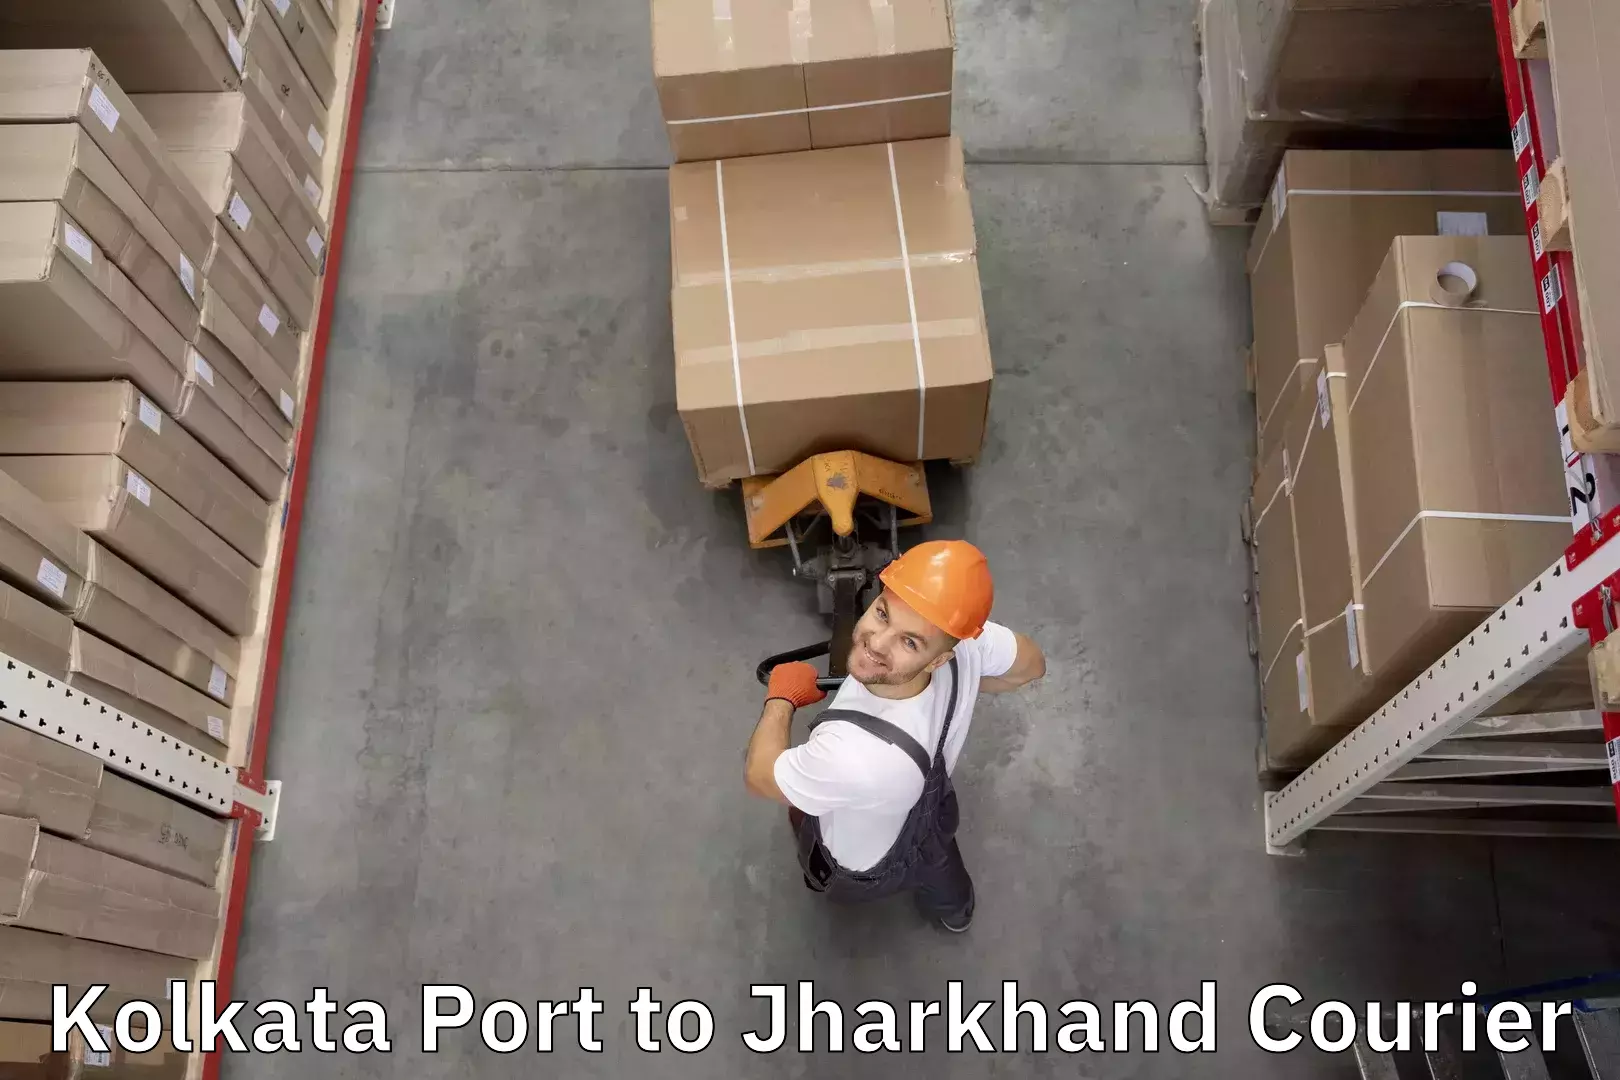 Luggage delivery solutions in Kolkata Port to Godabar Chatra